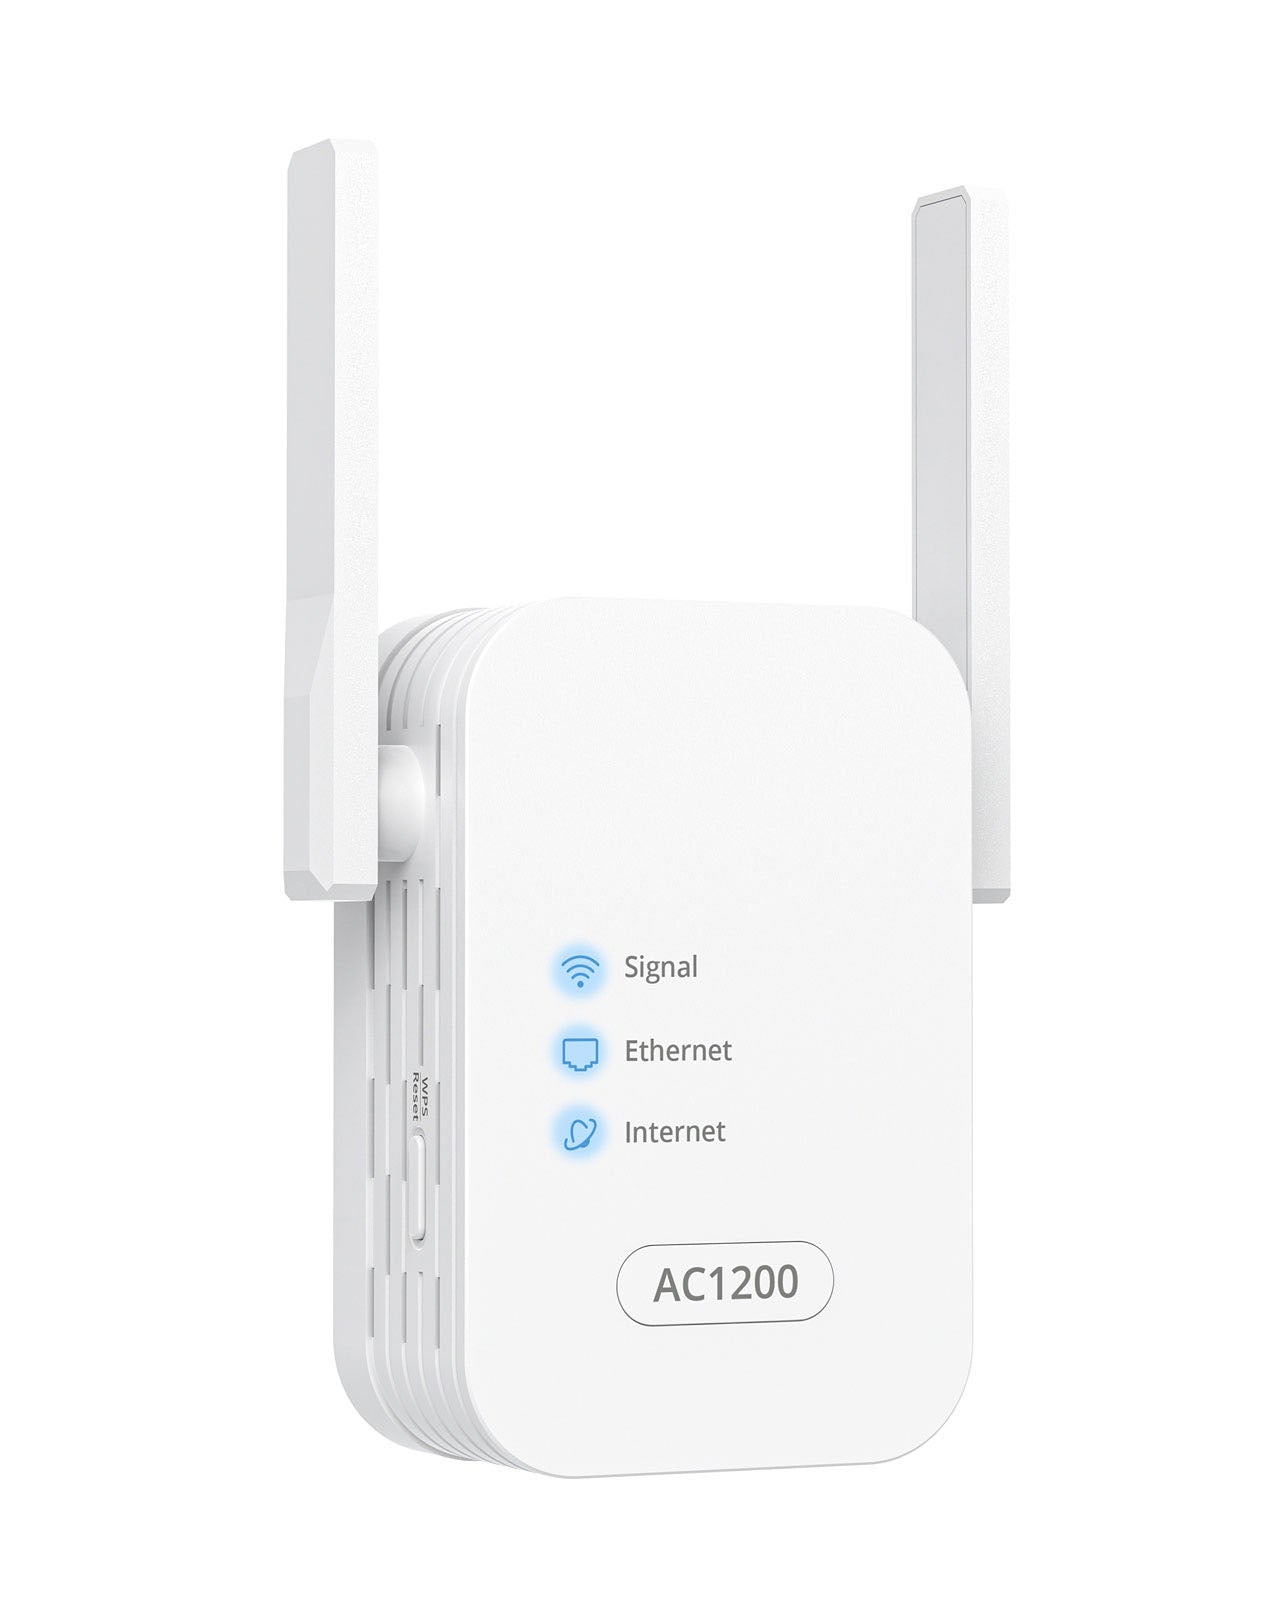 ioGiant 1200Mbps WiFi Extender